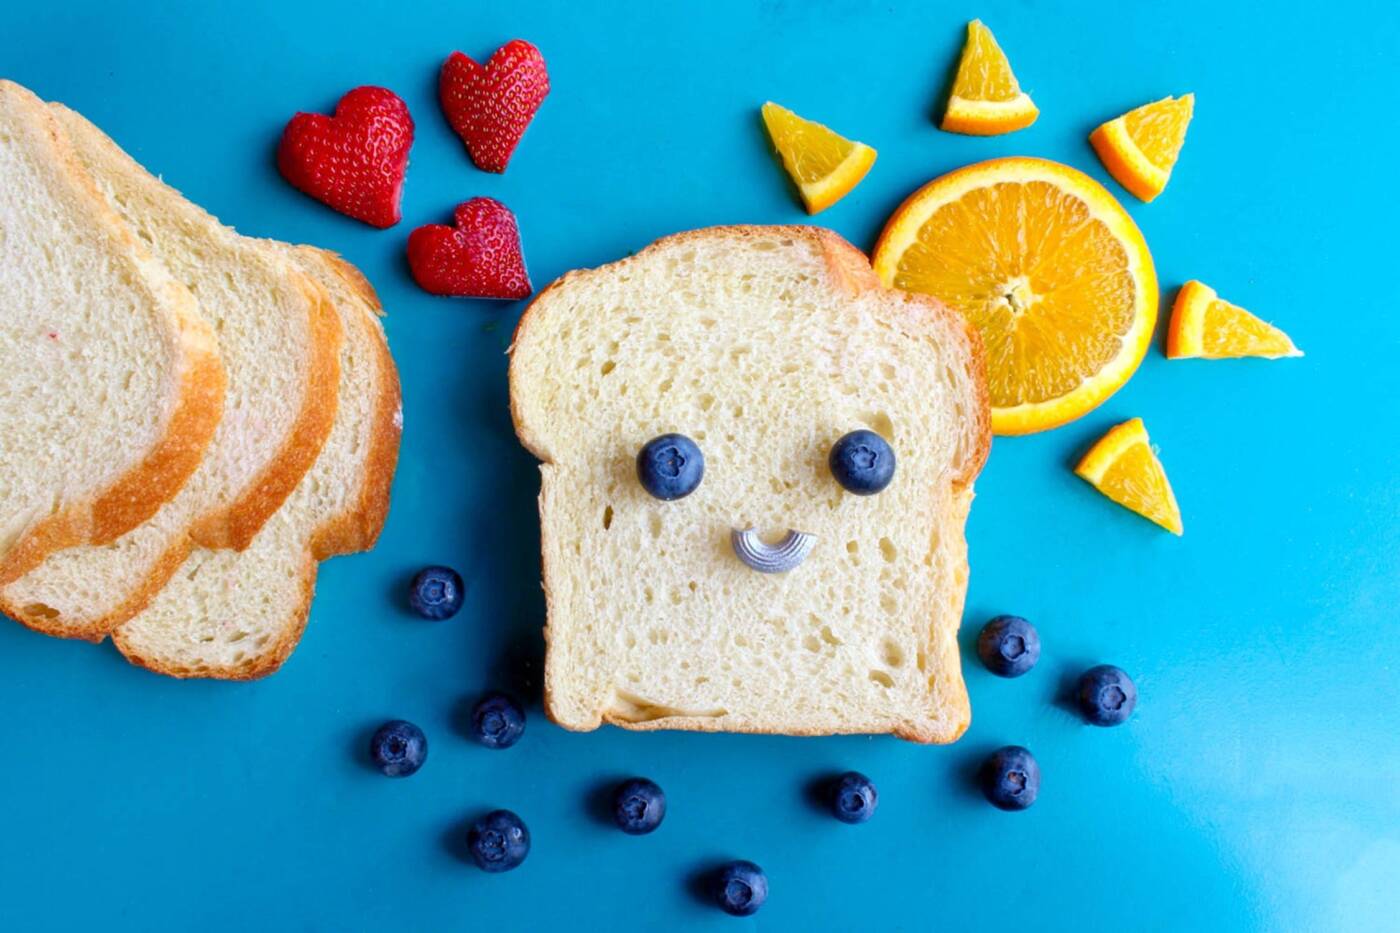 A slice of white bread with a blueberry smiling face.